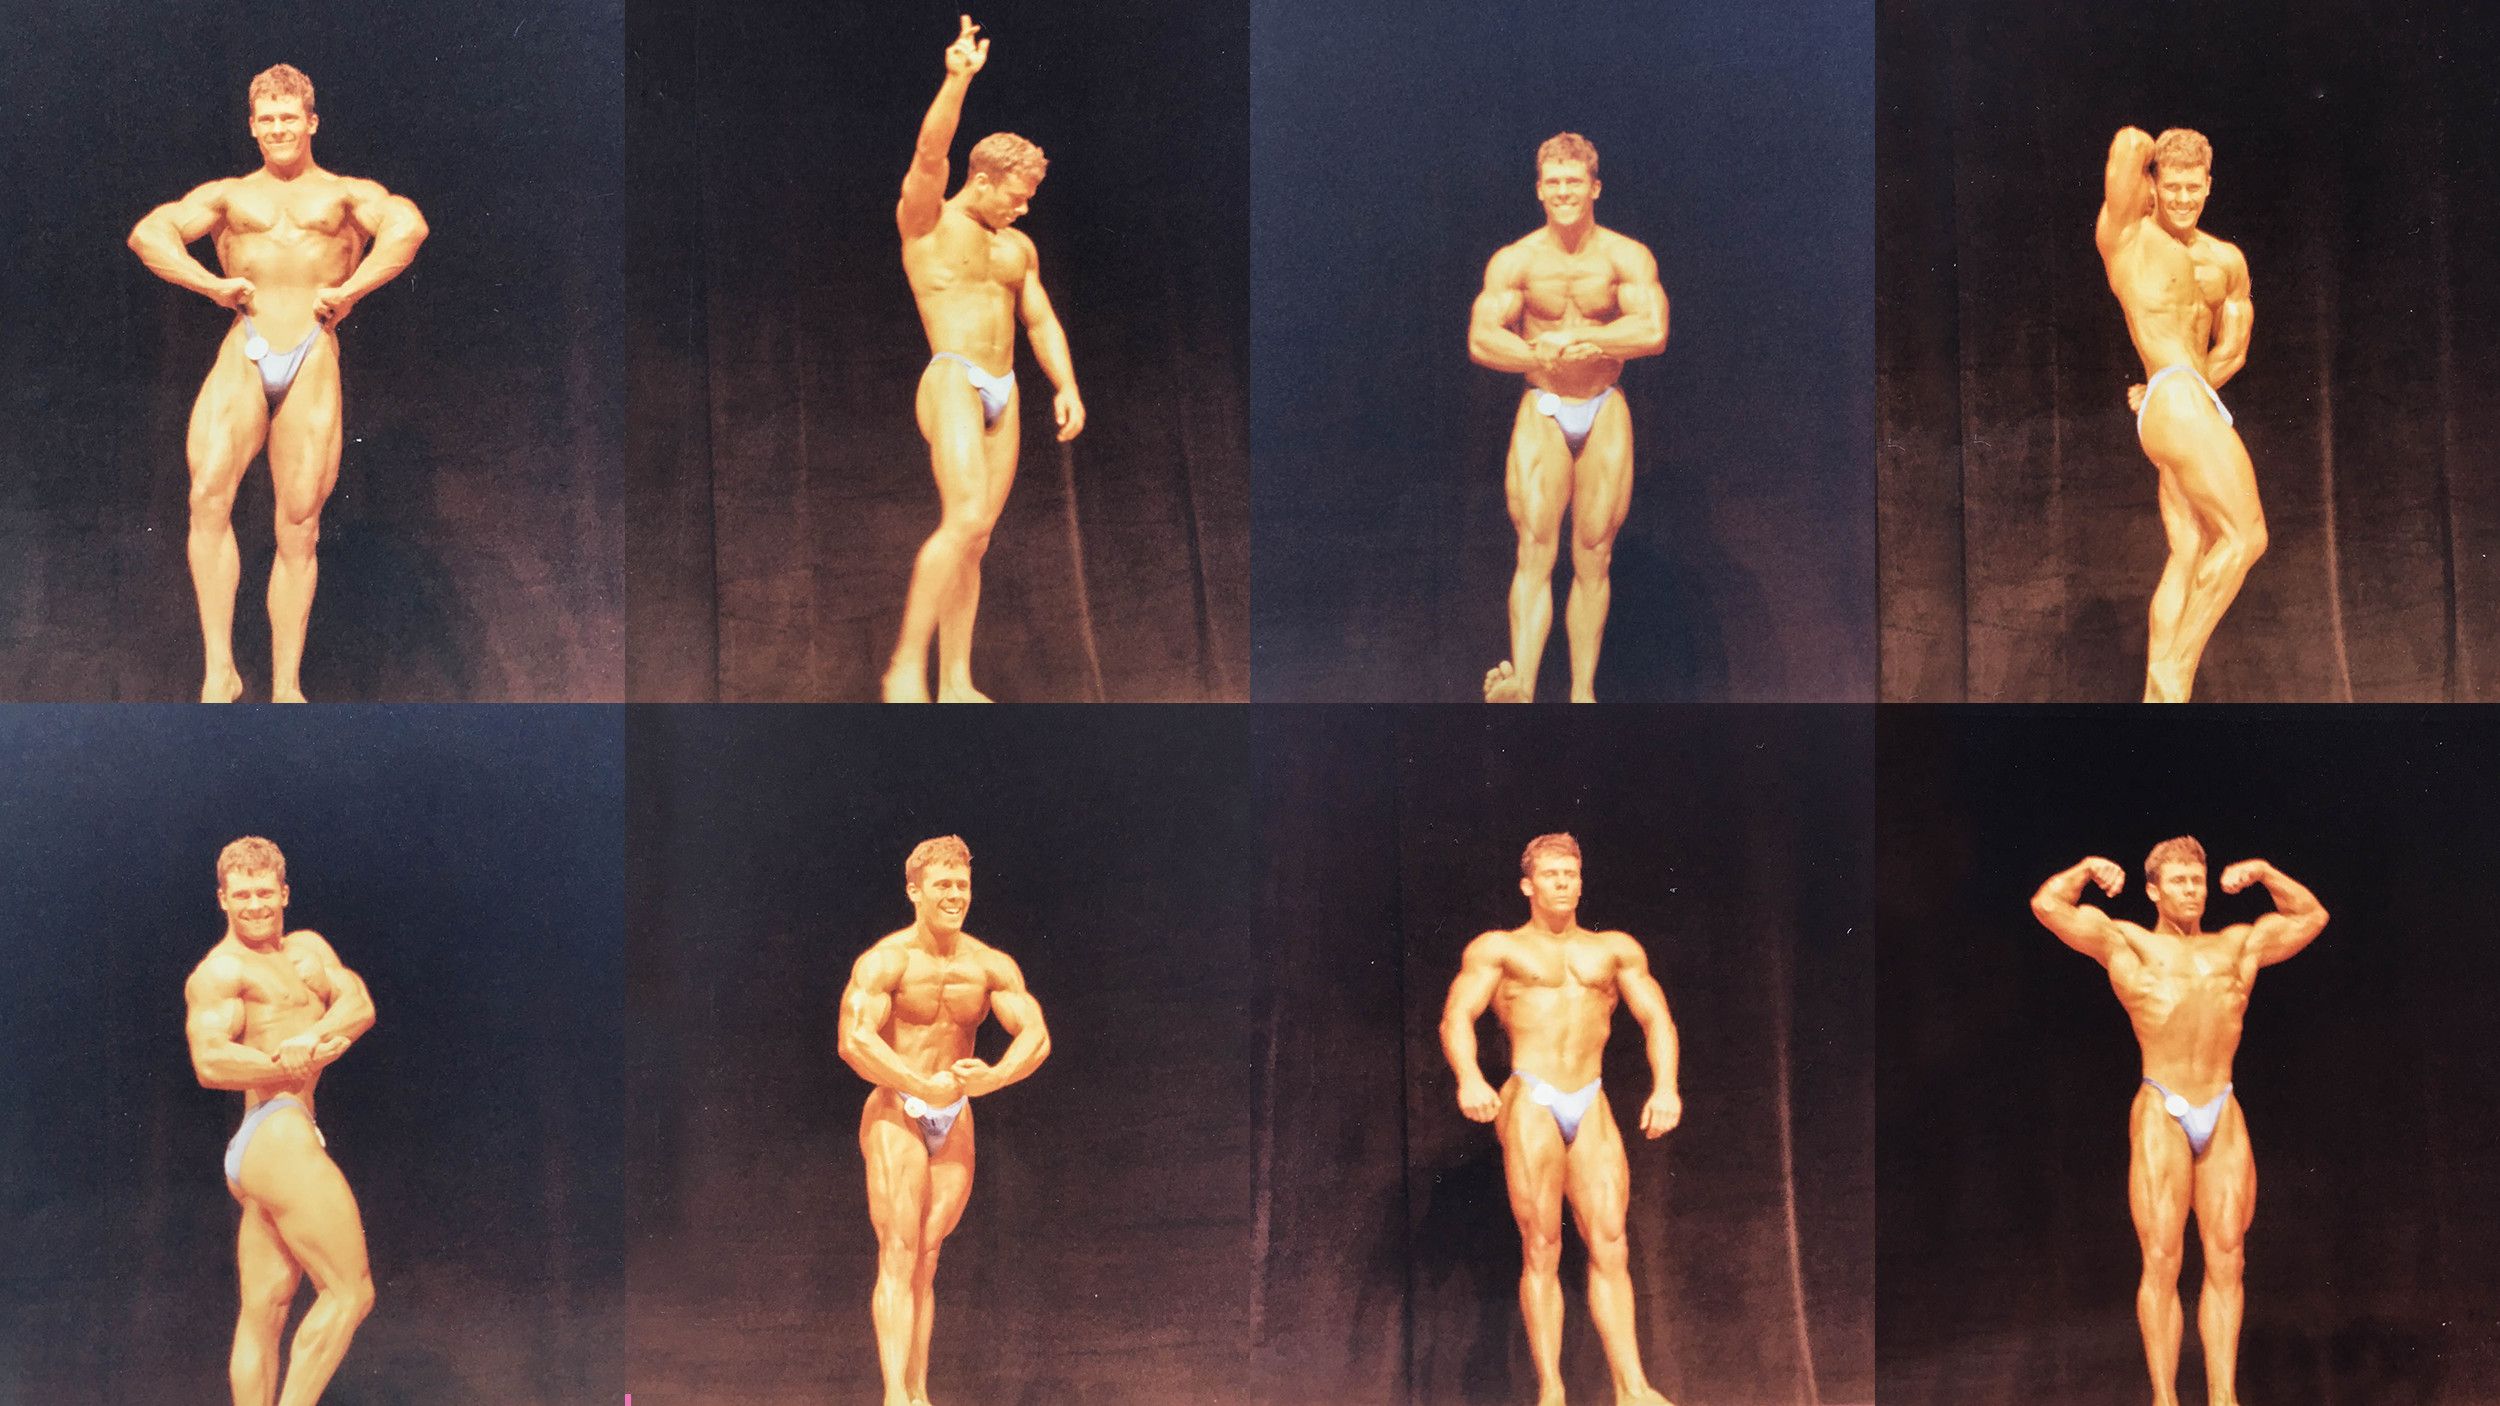 Nudist Beach Boner - Ripped: My Life as a Competitive Bodybuilder